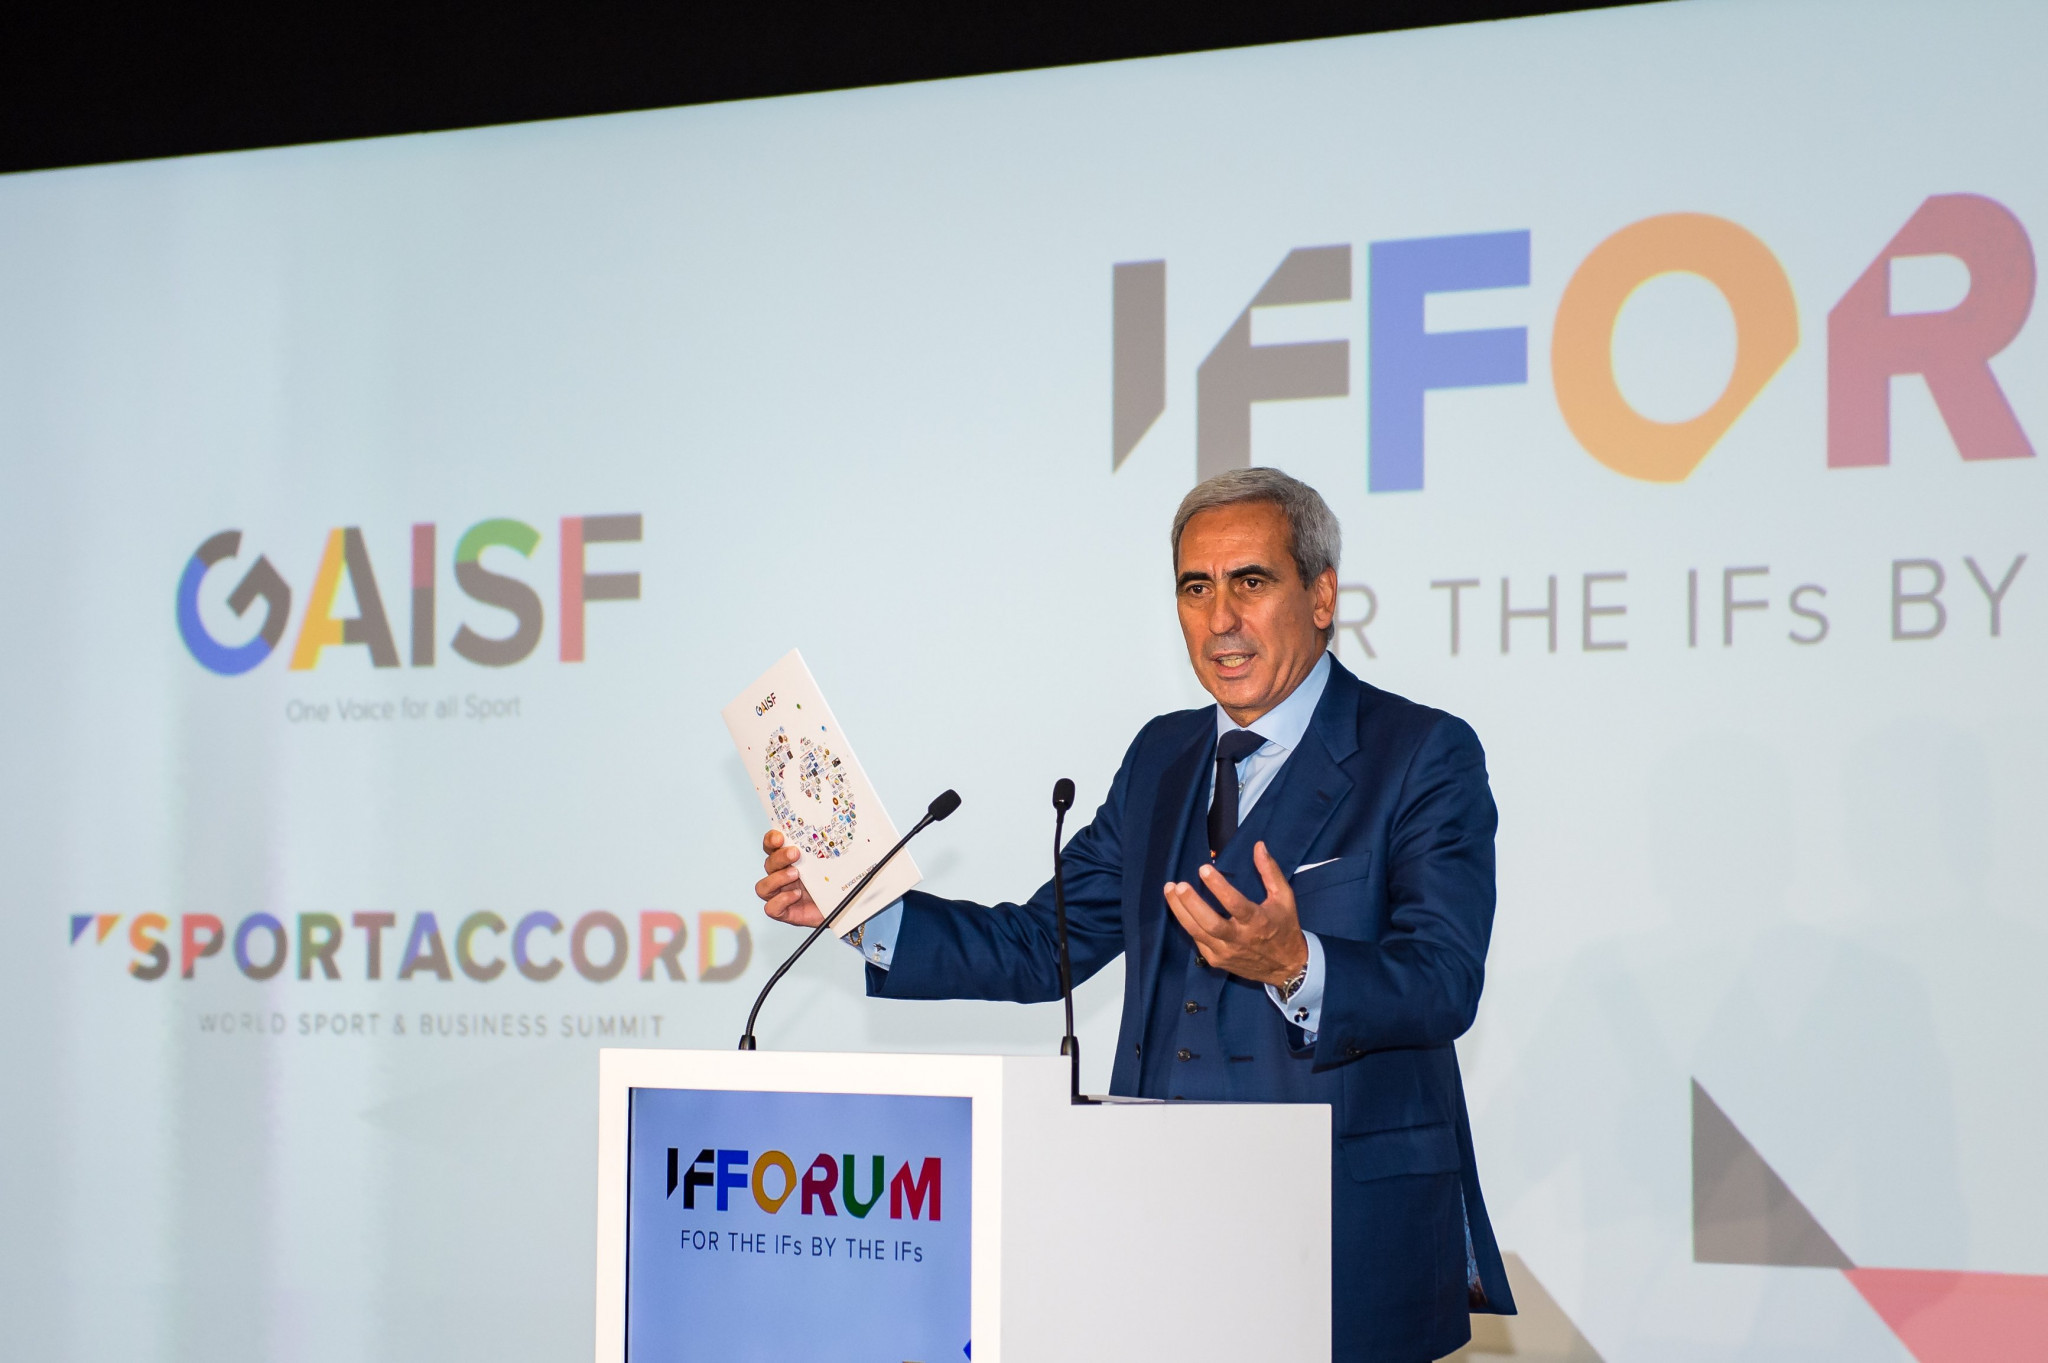 GAISF President GAISF President Raffaele Chiulli opening the first full day of the IF Forum in Lausanne ©Twitter